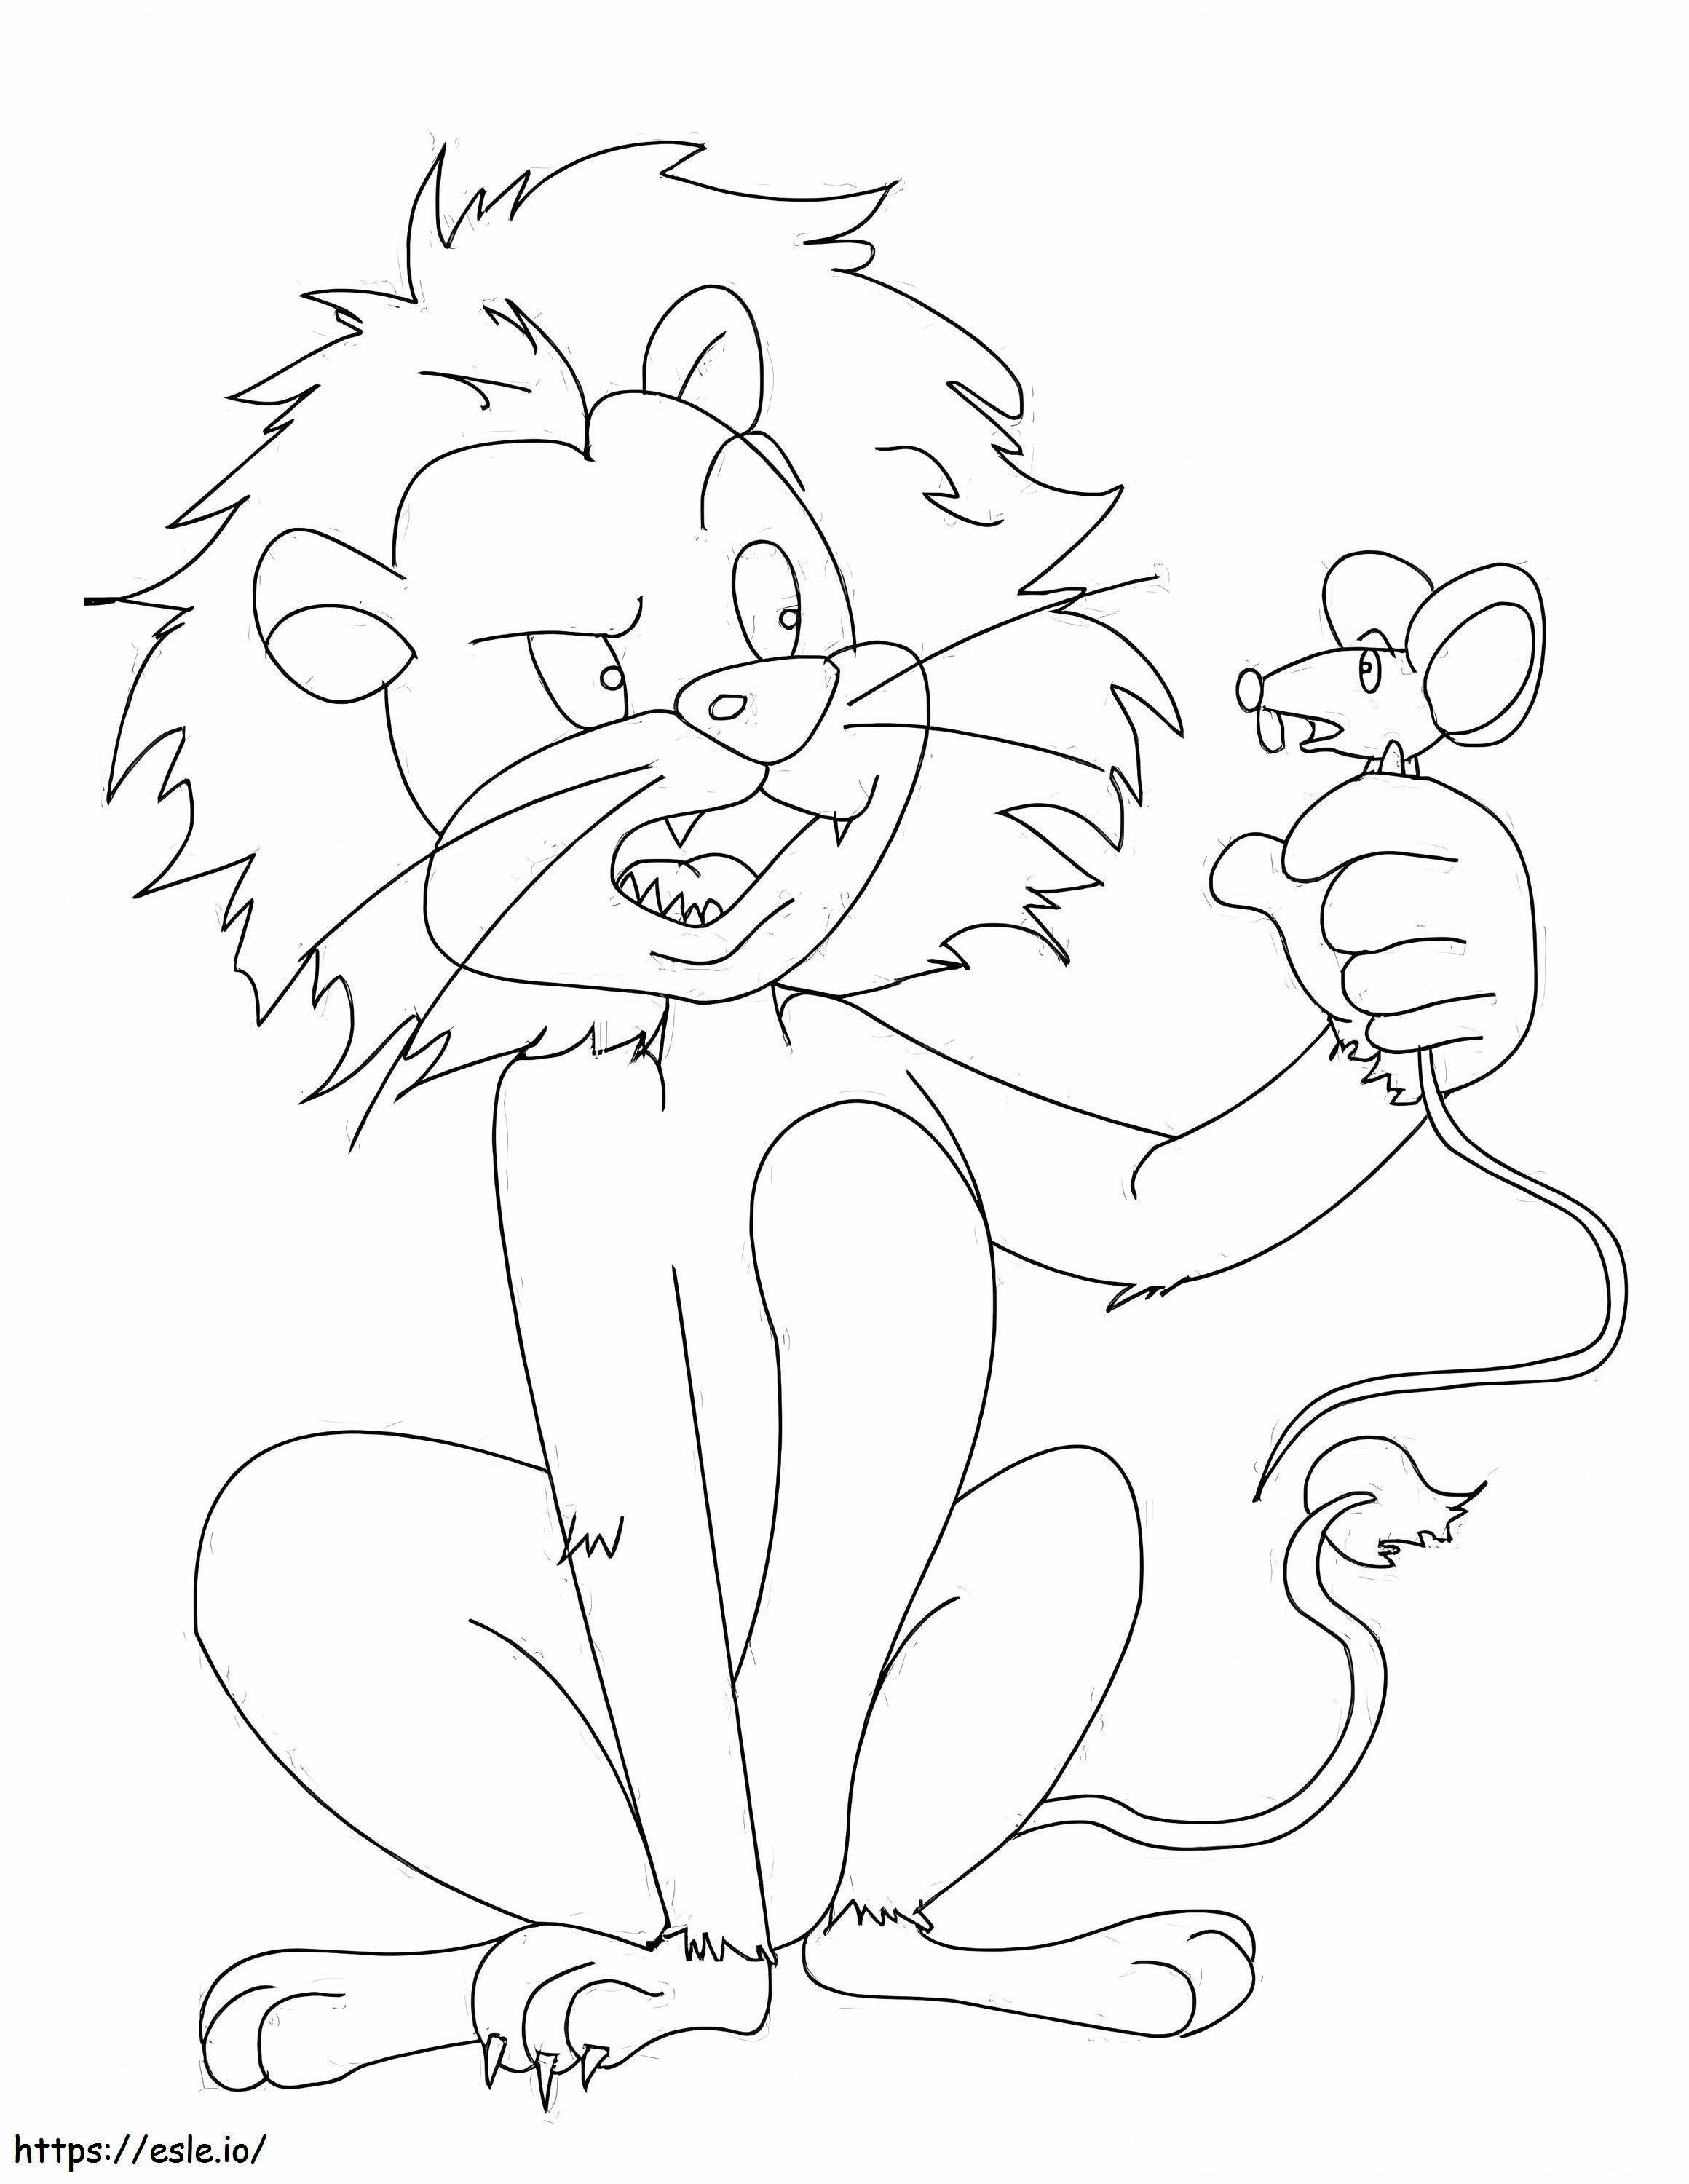 Lion And The Mouse Kids Page Lion And The Mouse Story 2 Pages Mouse The Lion Coloring And 1 1 1 792X1024 coloring page